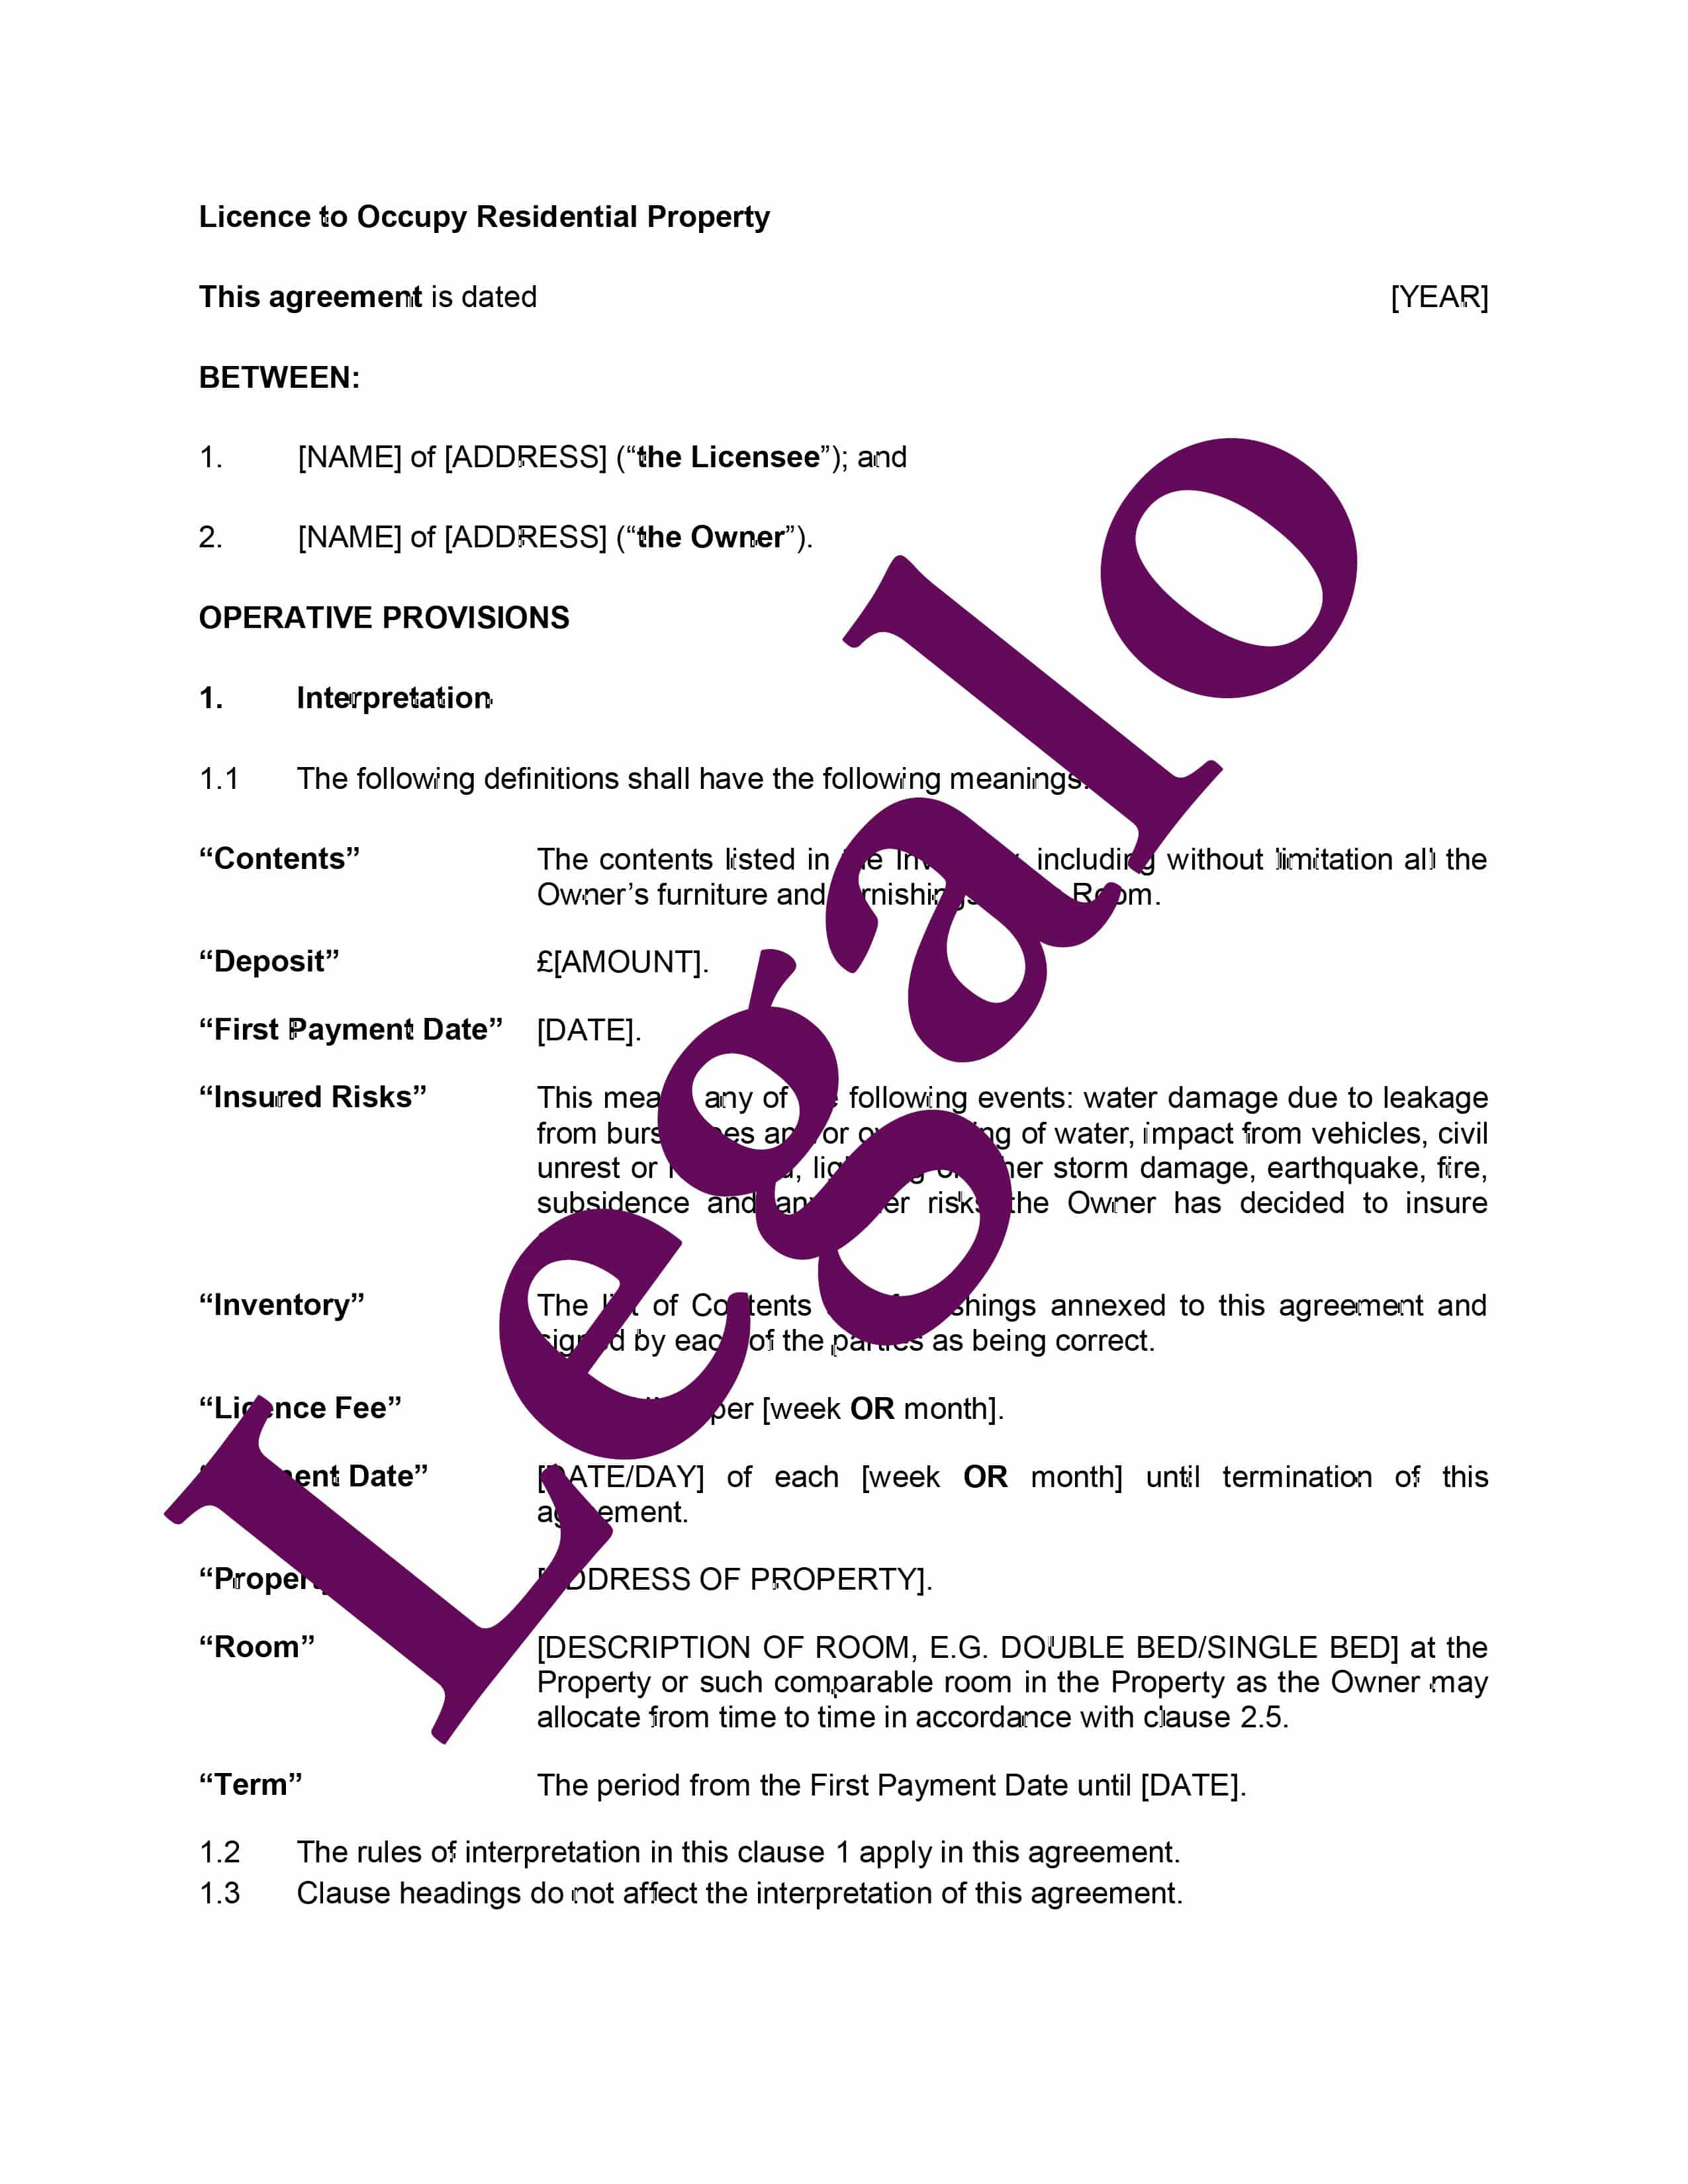 Licence To Occupy Residential Property Template - Legalo, UK Regarding shelter lodger agreement template